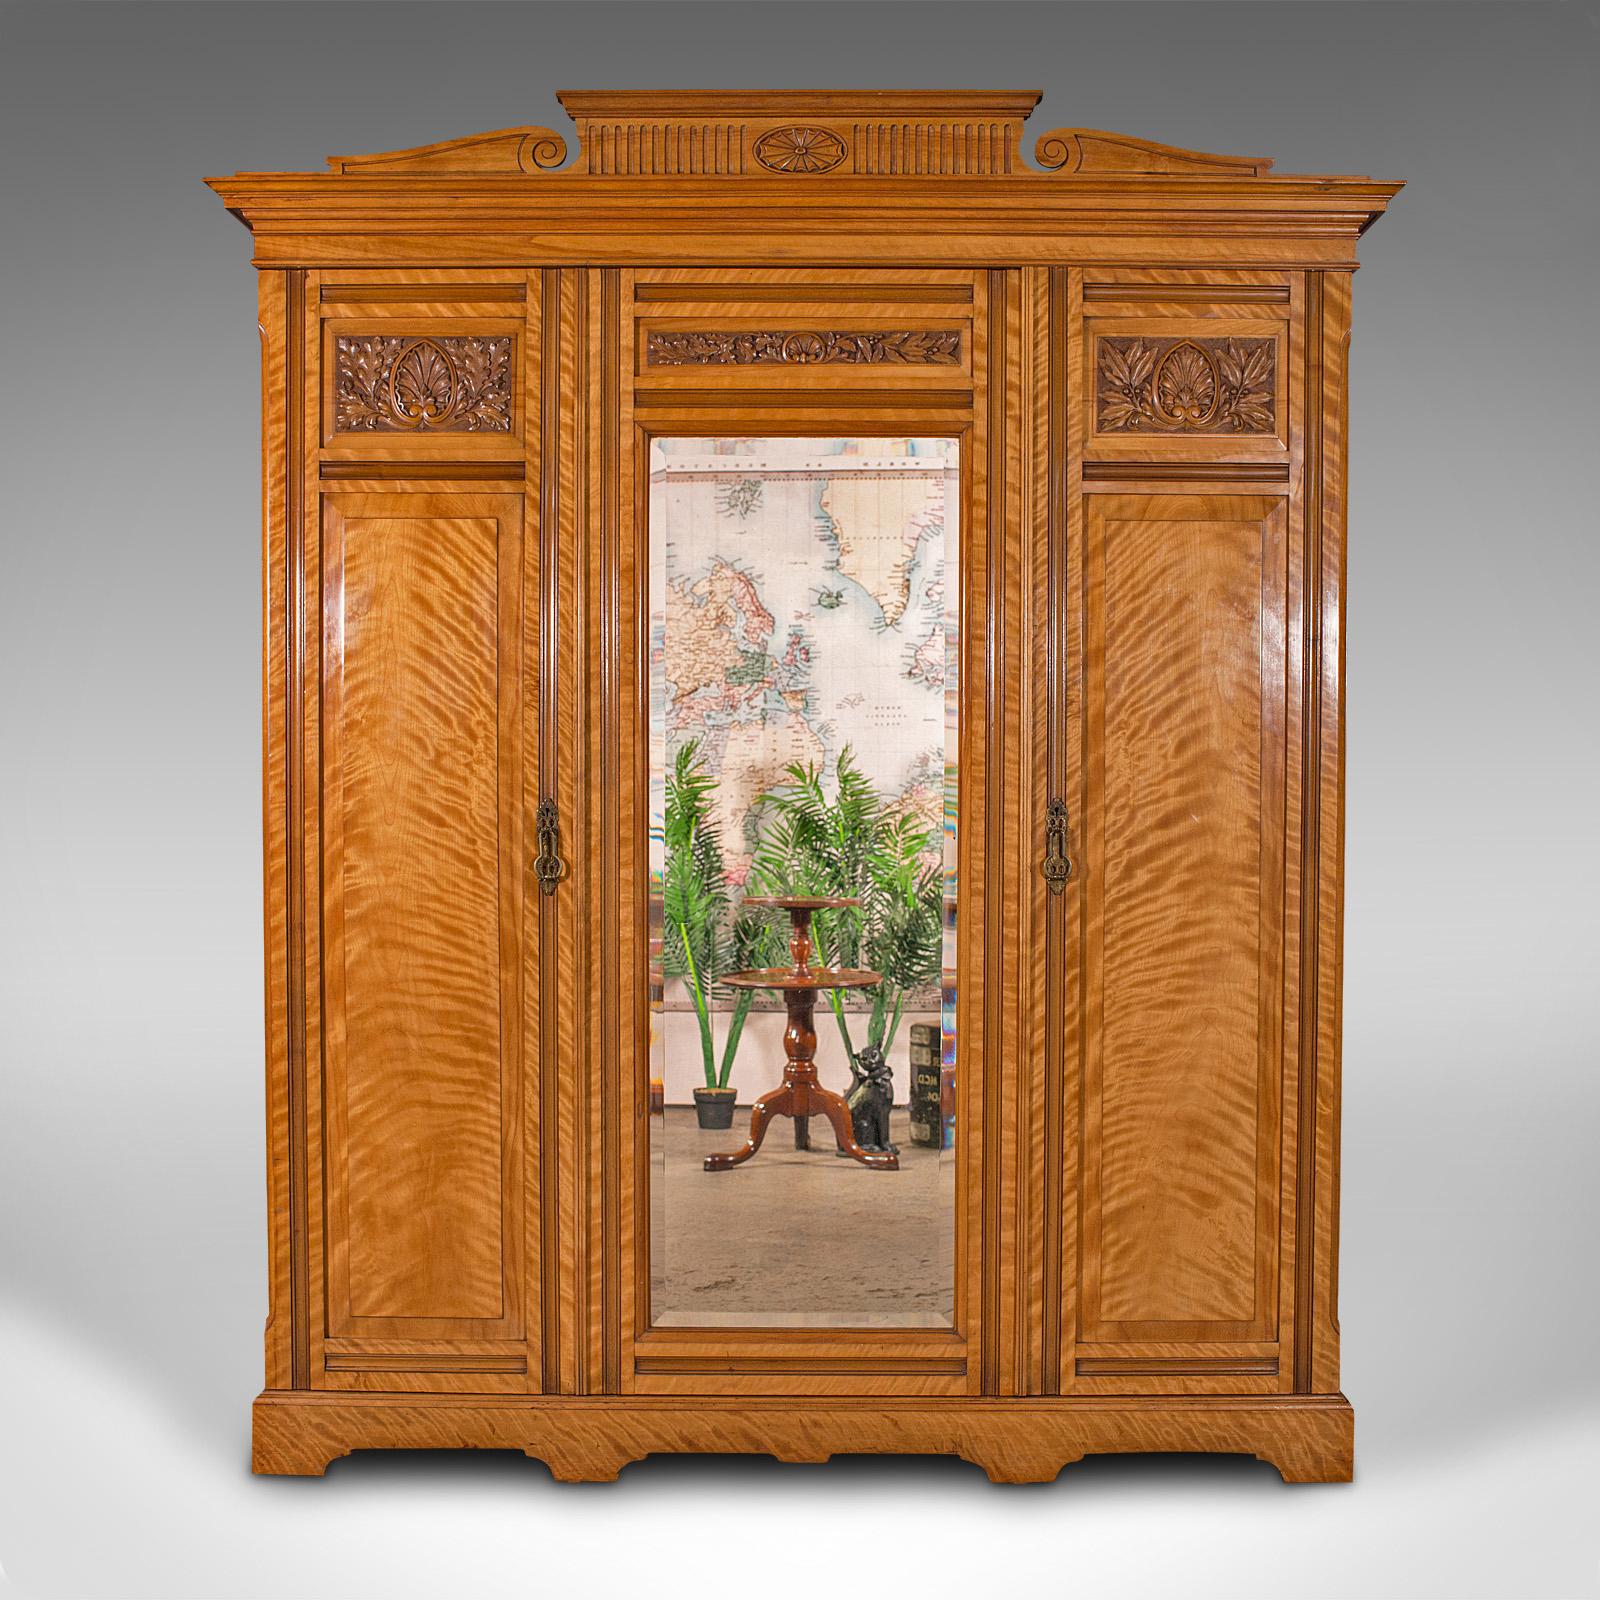 This is an exceptional antique triple wardrobe. A Scottish, satinwood dressing cupboard with mirror by Taylor & Sons of Edinburgh, dating to the late Victorian period, circa 1890.

Striking craftsmanship and figuring for the grandest of